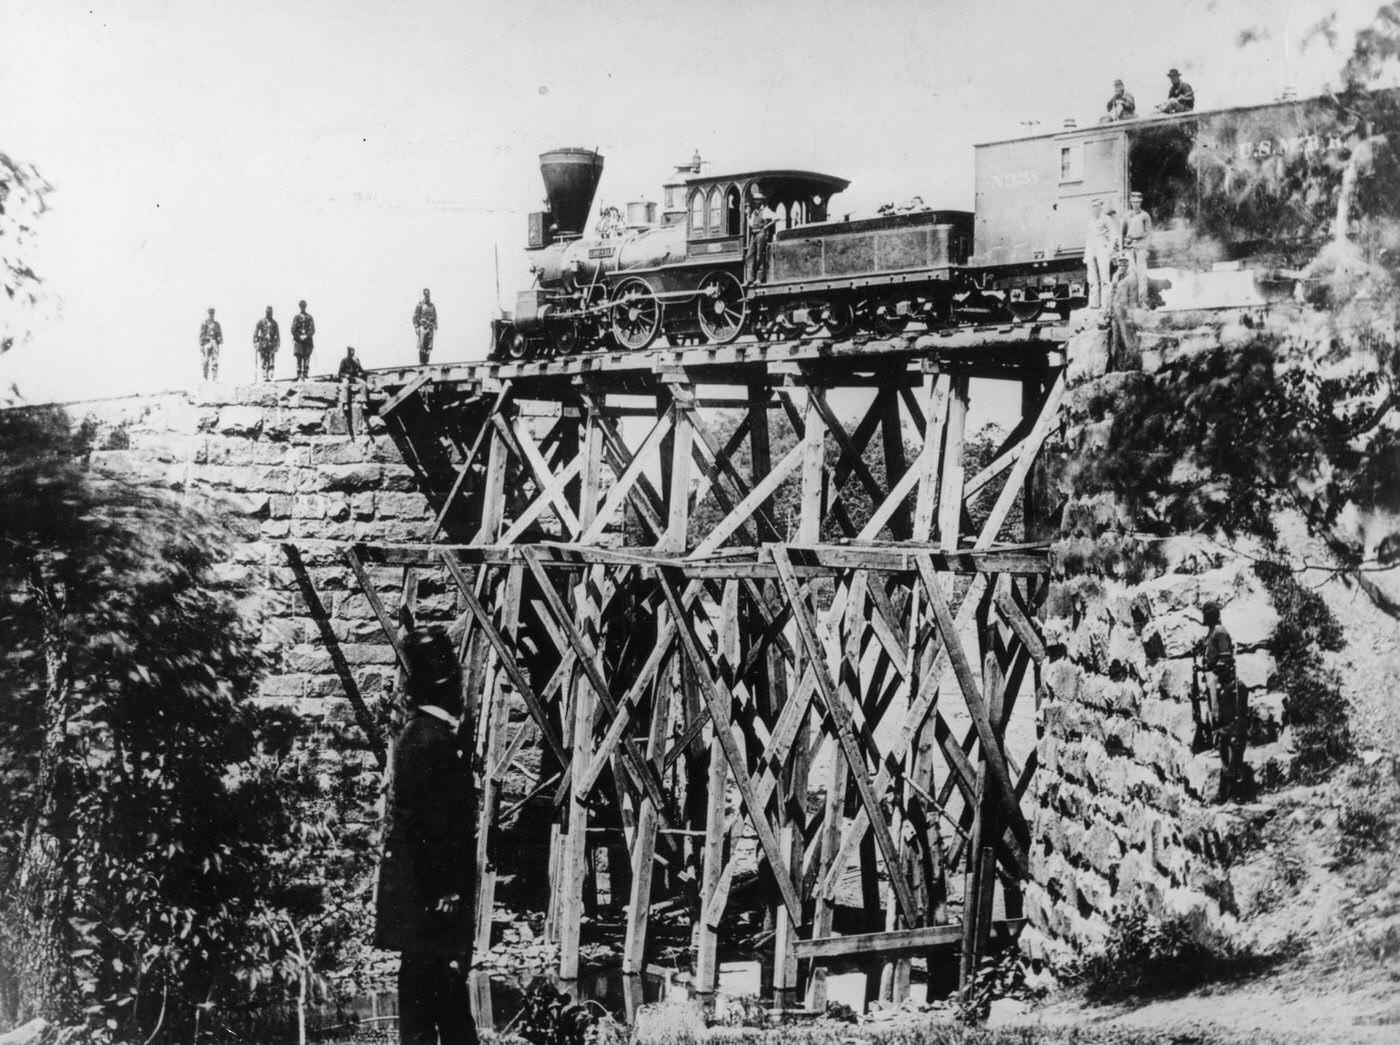 Steam locomotive 'Fire Fly', used by Union troops, on a narrow field bridge of the Orange and Alexandria US Military Railroad, 1865